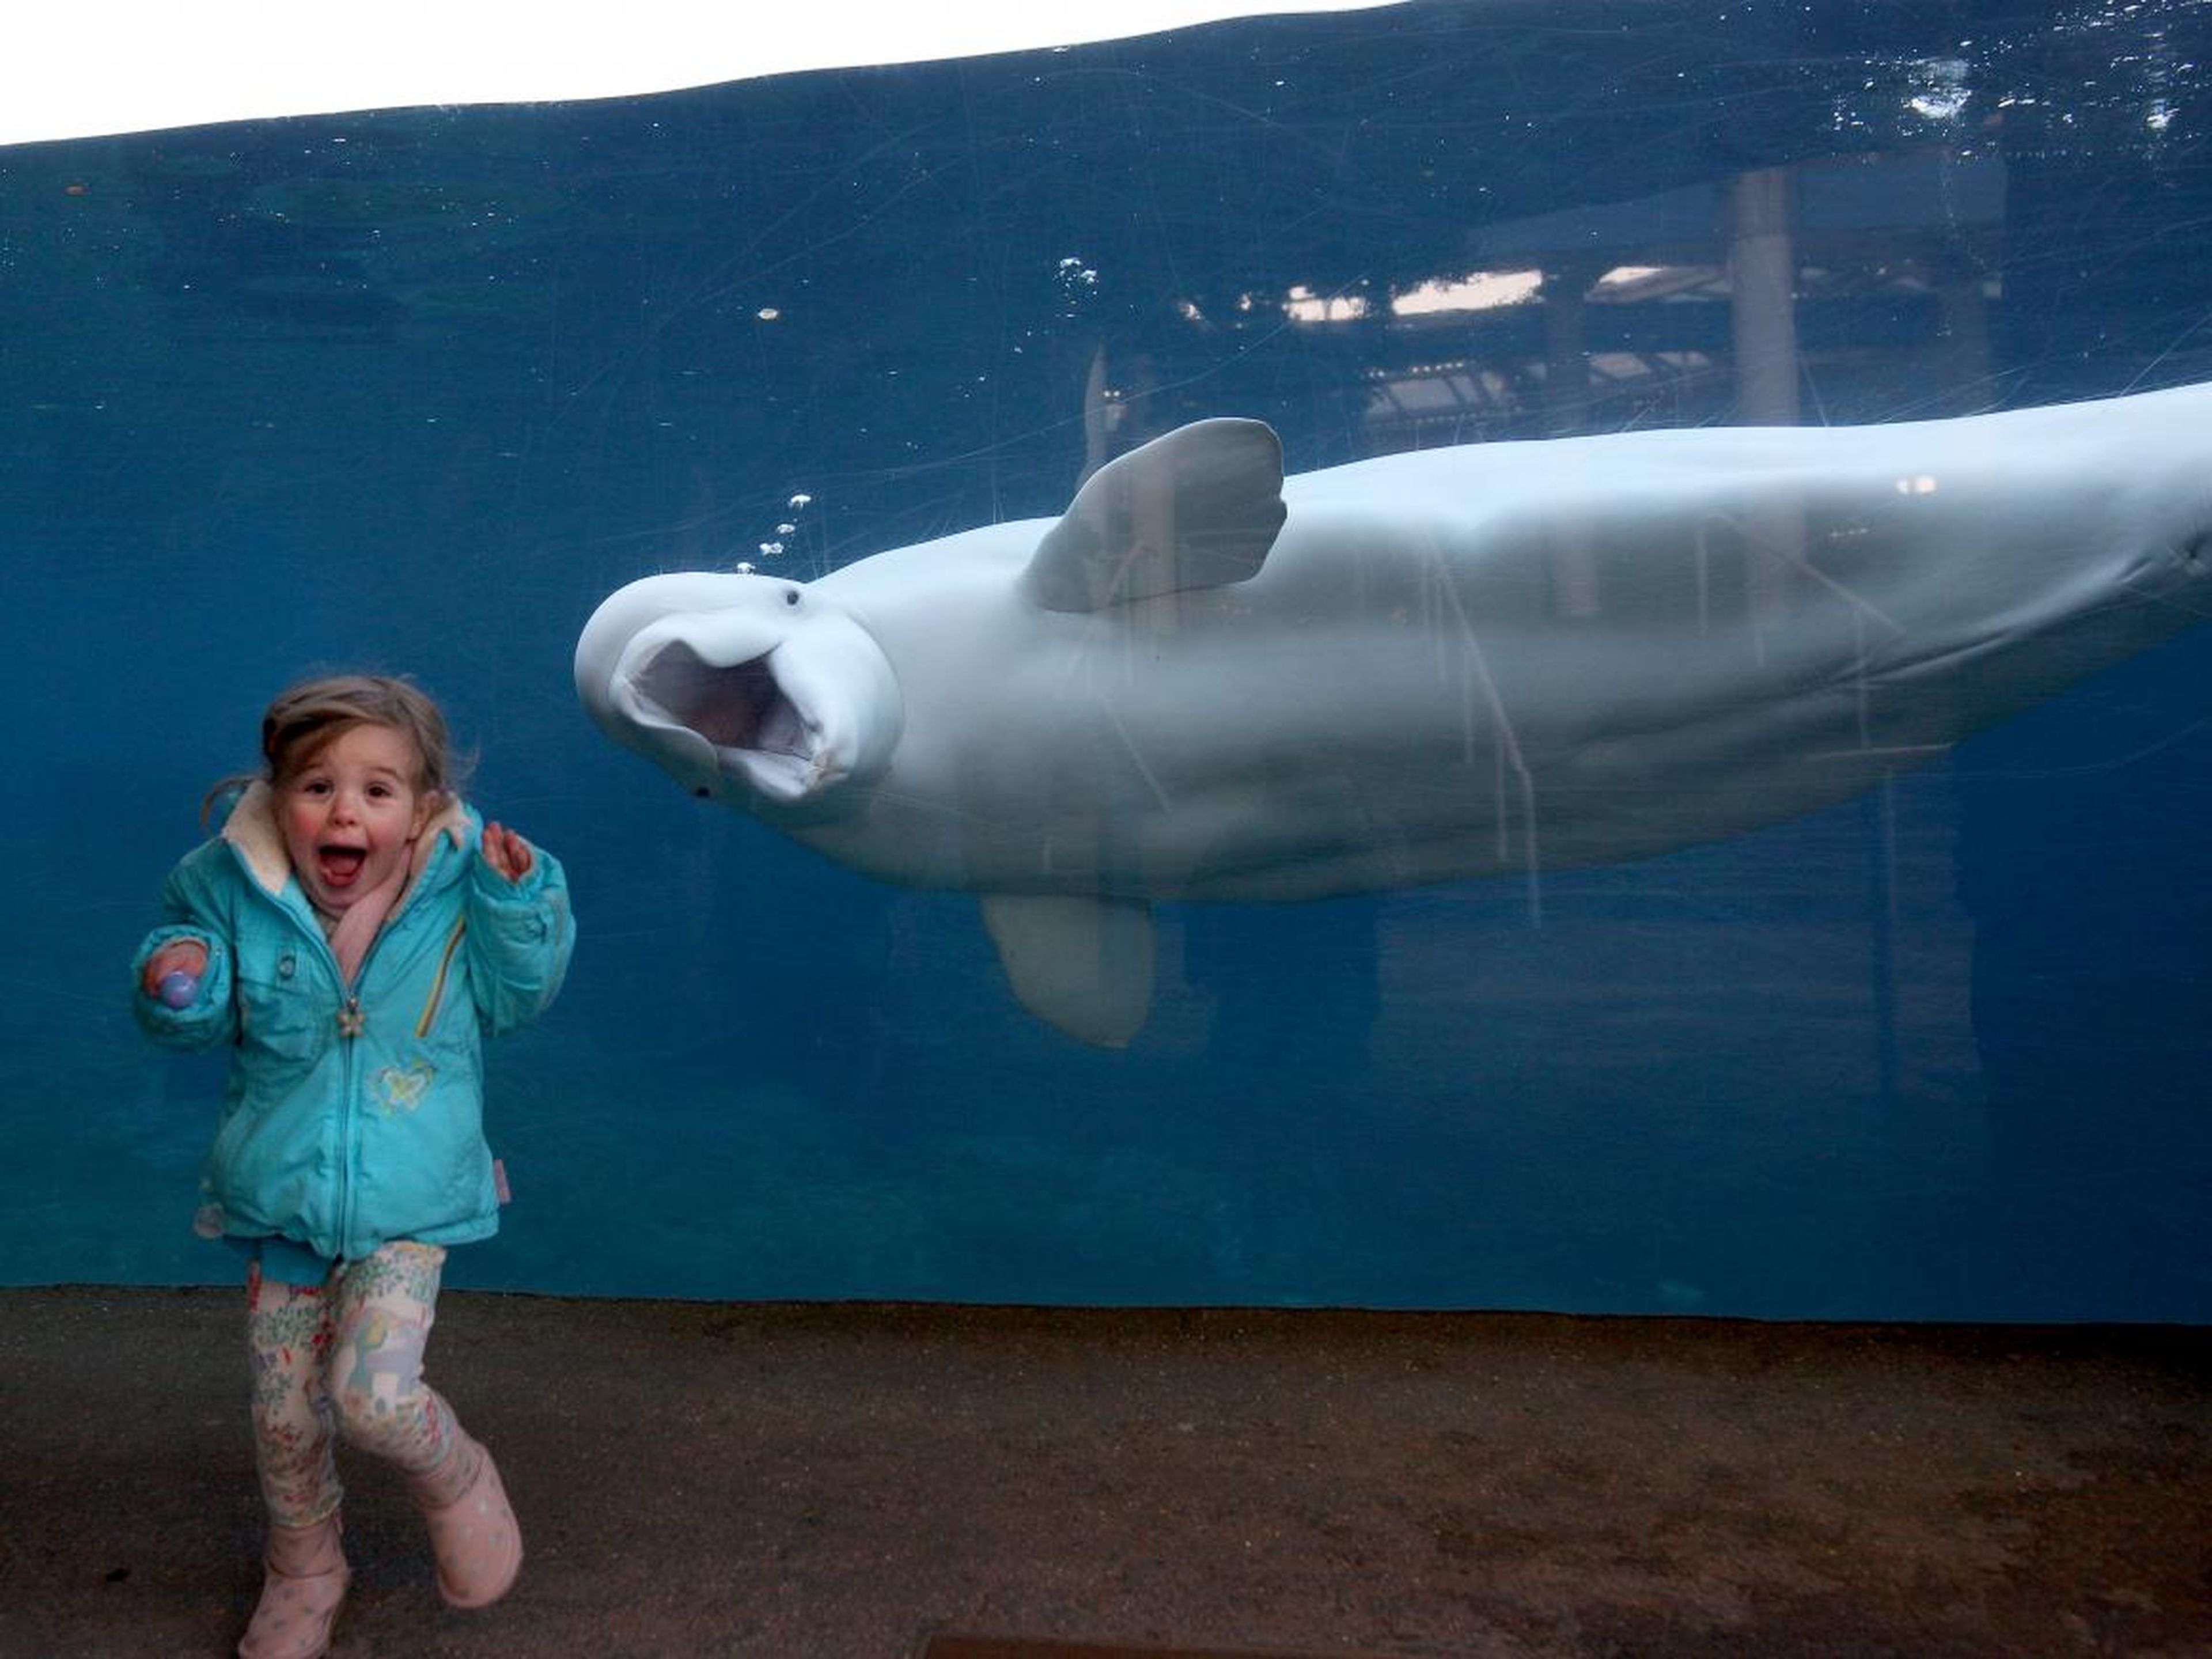 This beluga whale is camera-ready.